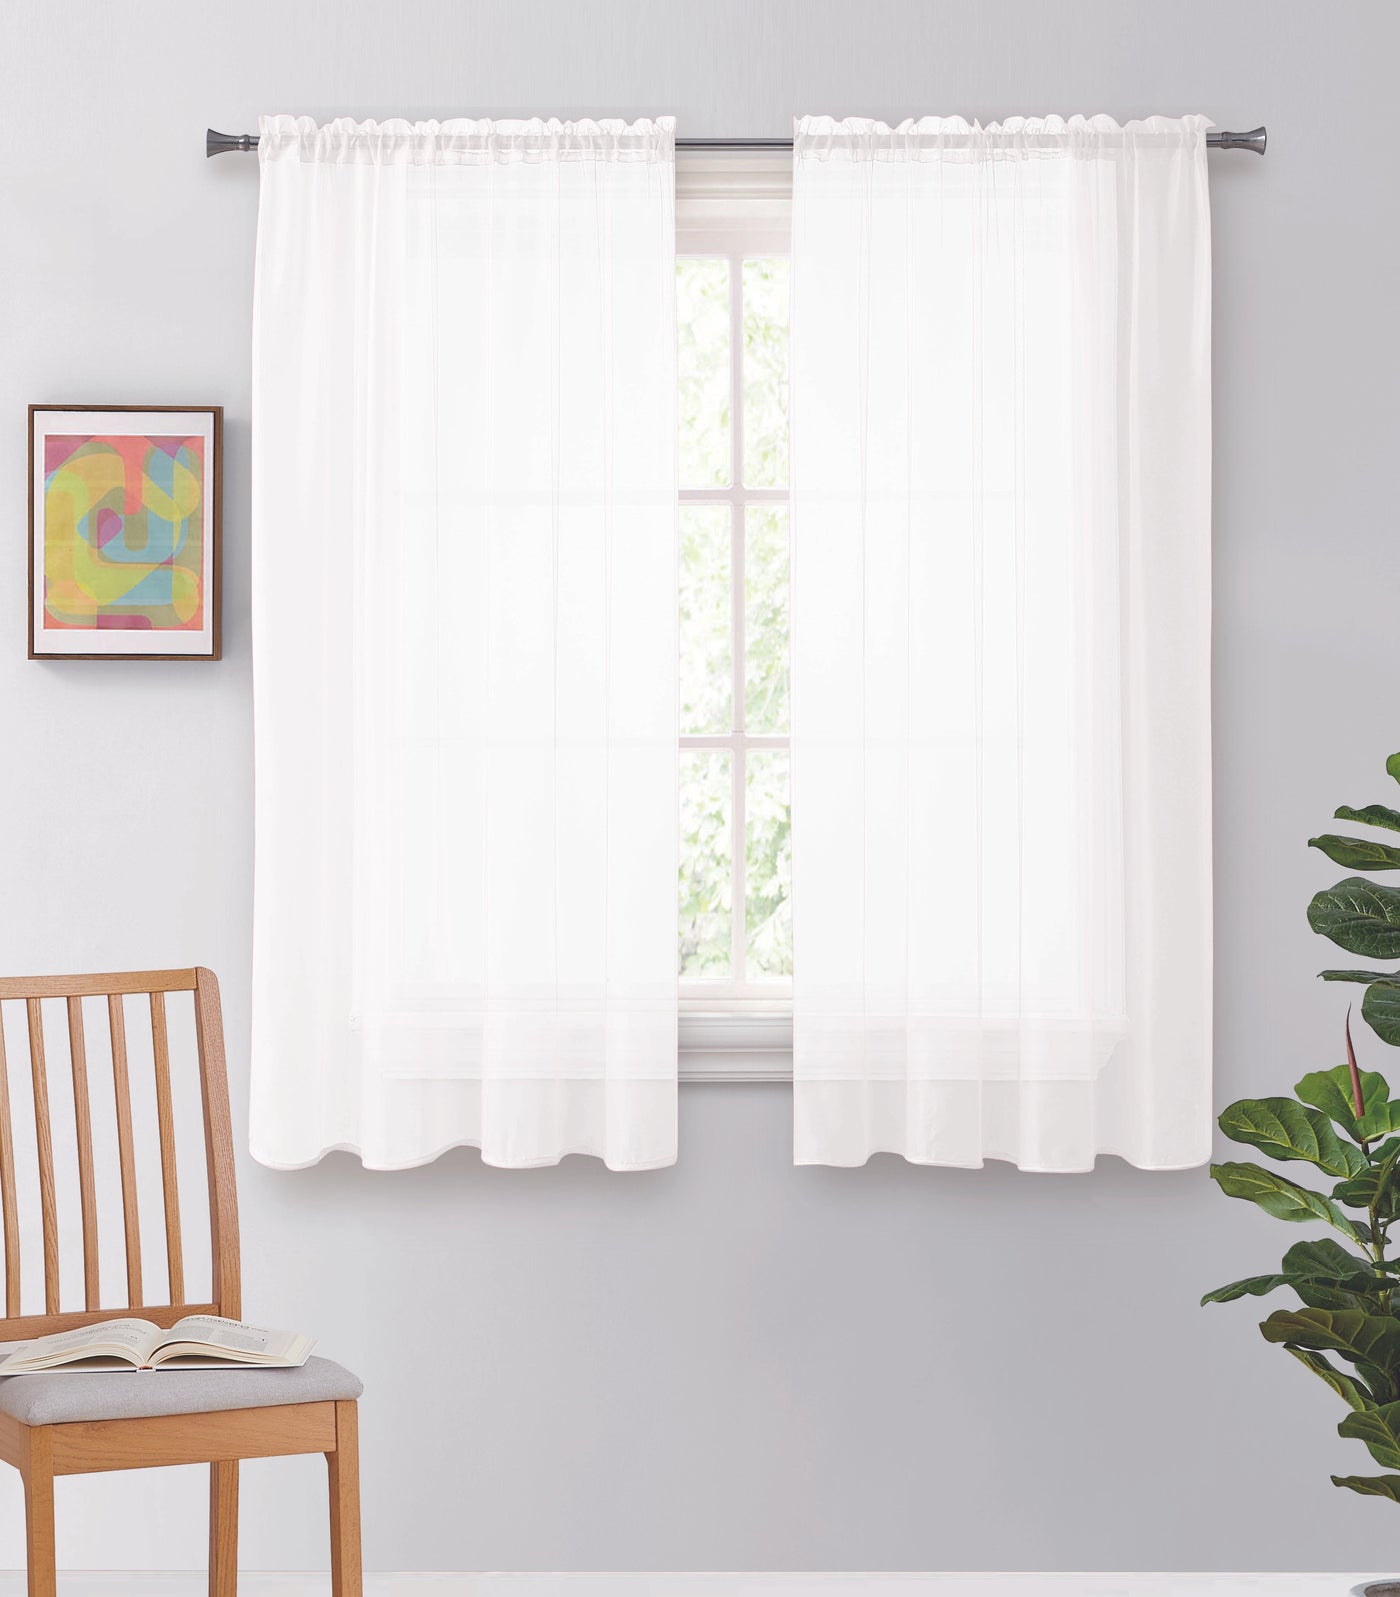 Solid Voile Rod Pocket Sheer Curtains for Bedroom Drapes Set of 2 63" Curtains for Bedroom Panels Window Treatment Home Decor 63" - Jenin-Home-Furnishing.CURTAINS